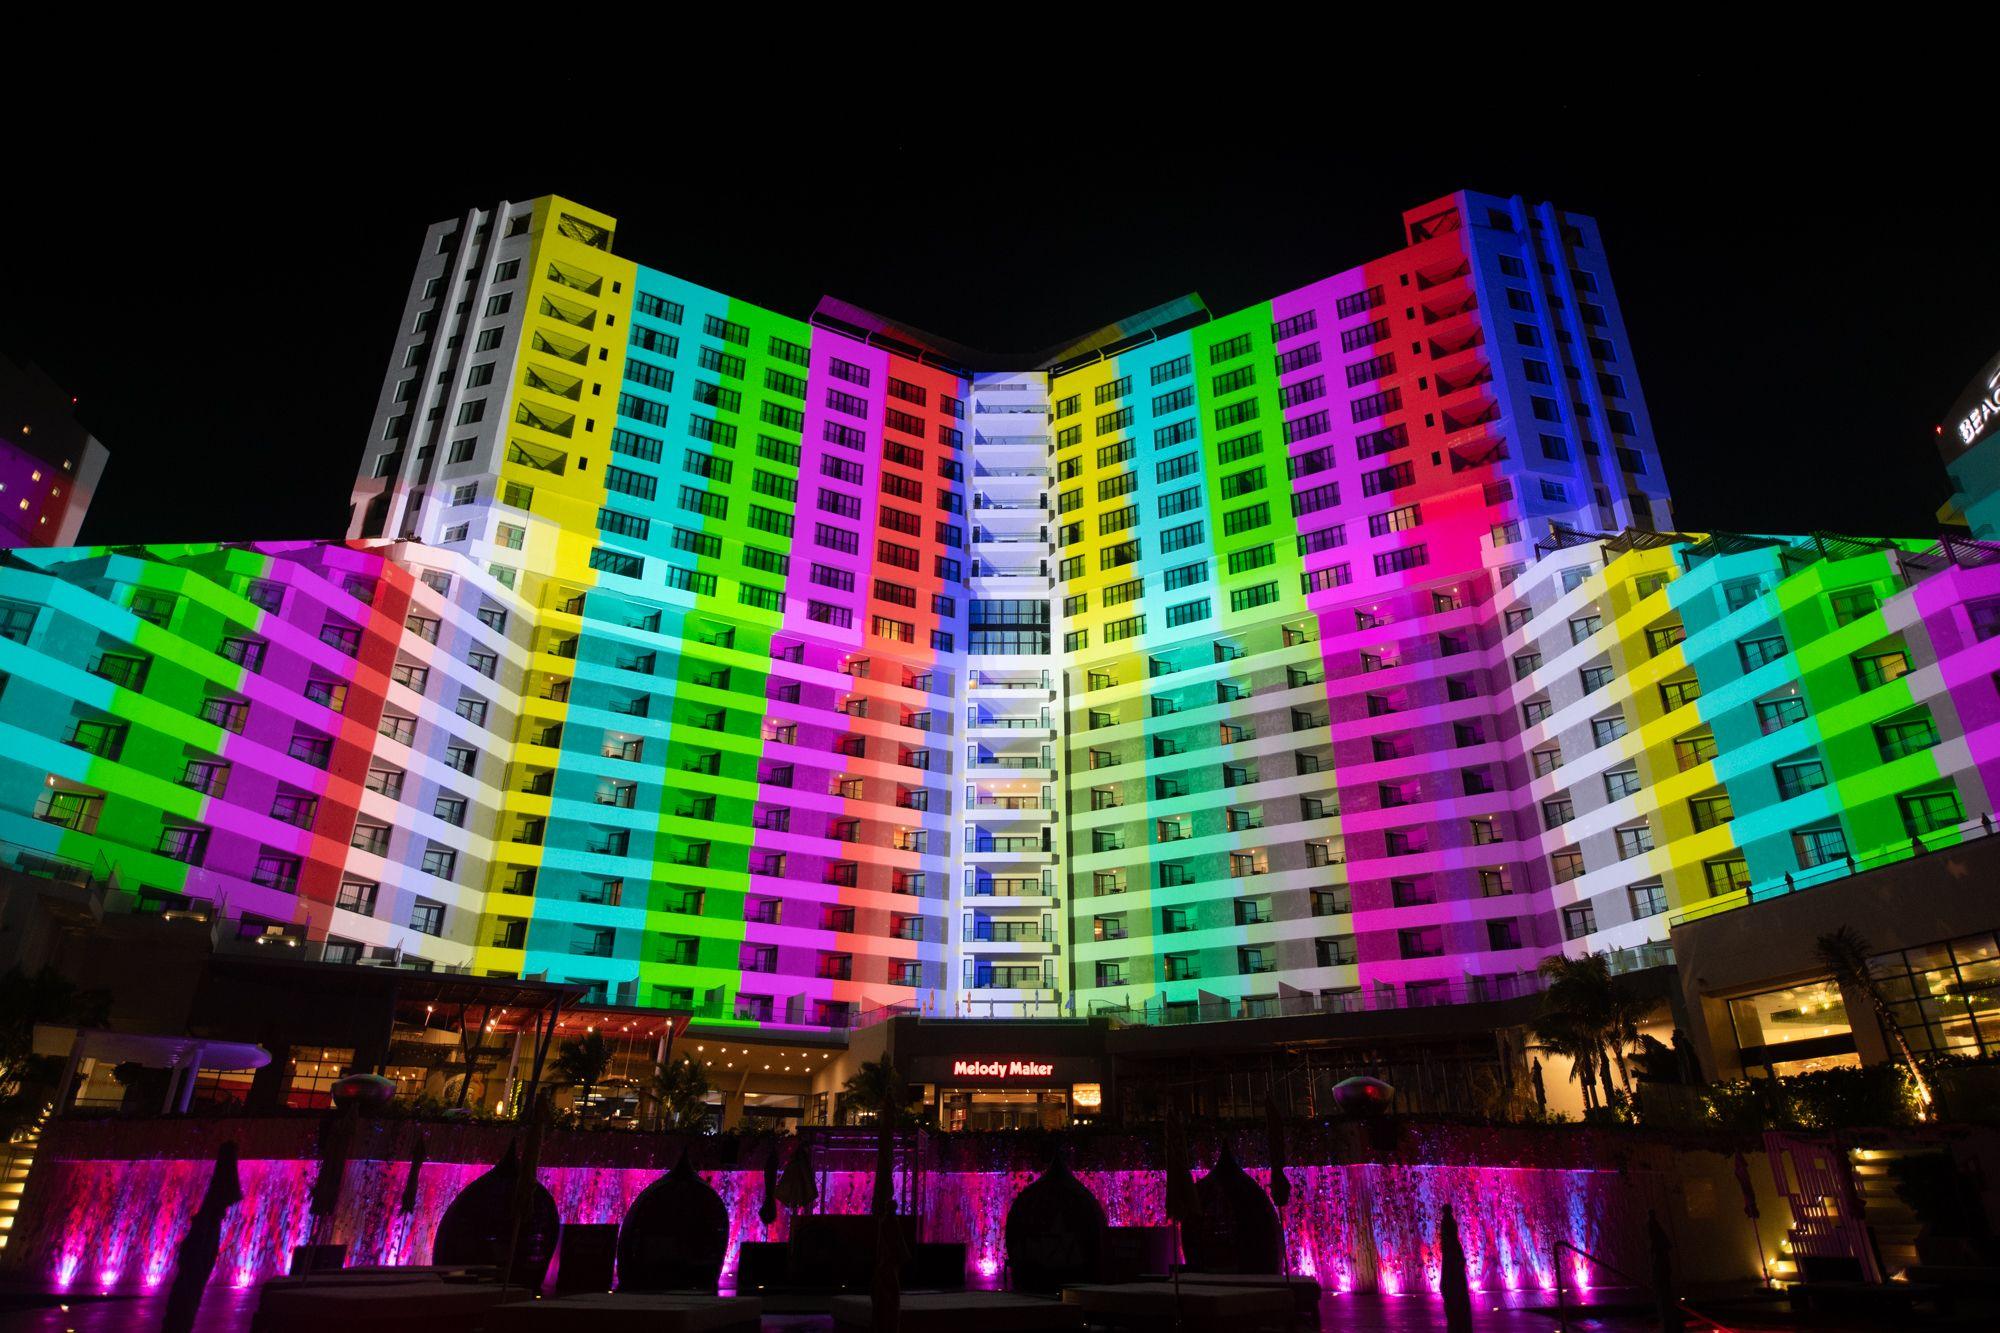 Video mapping onto the facade of Melody Maker Cancun Hotel